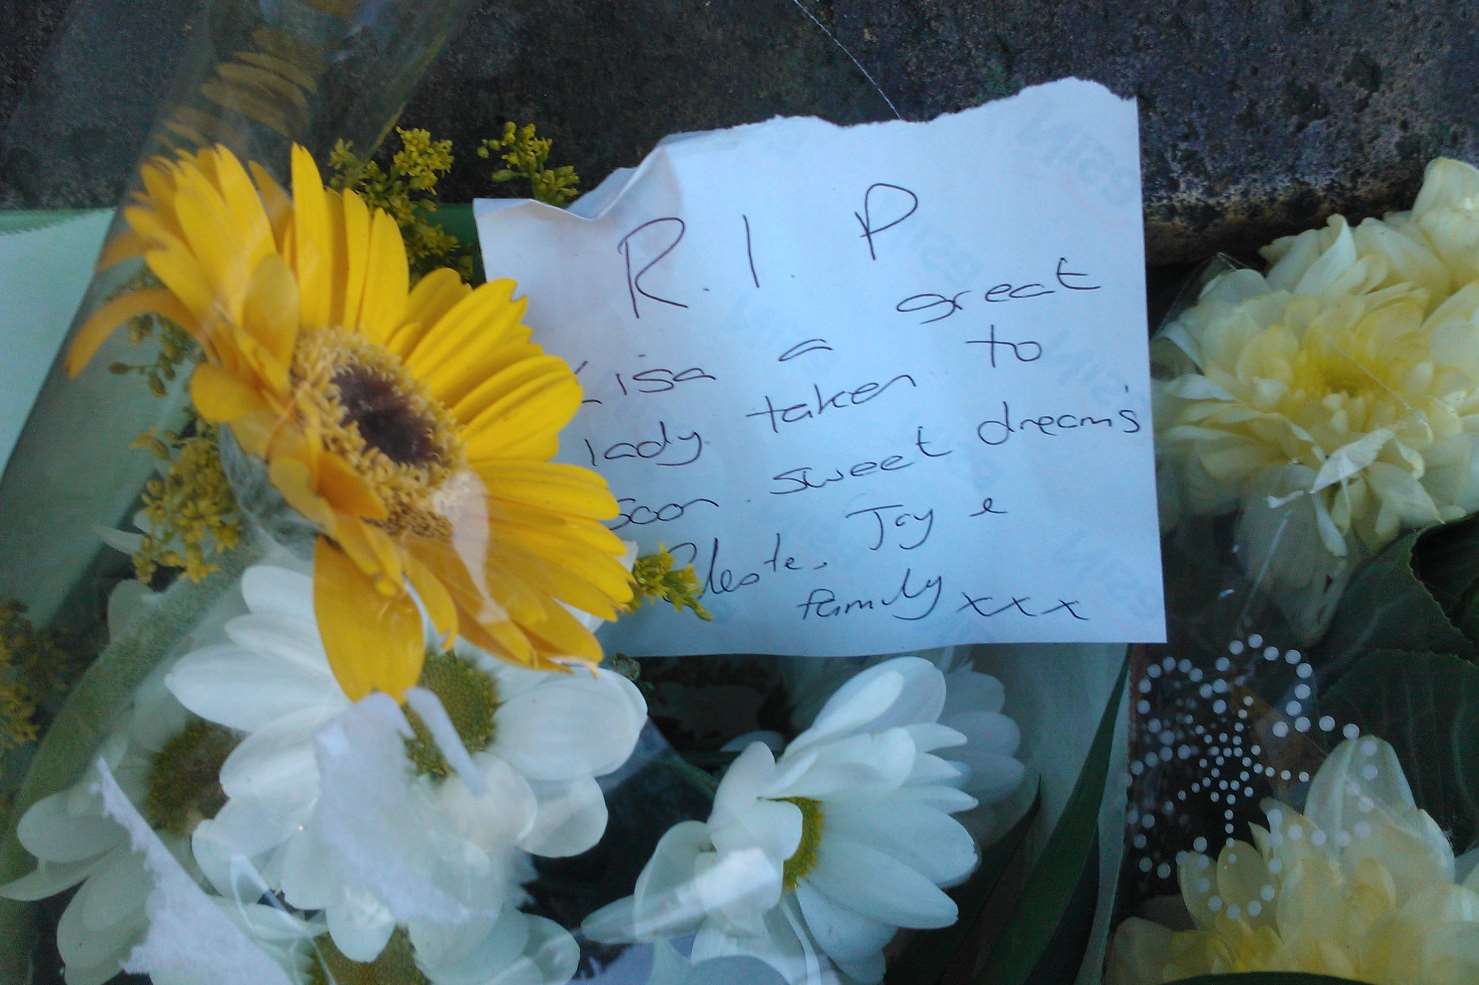 Floral tributes left at the scene following Lisa's death